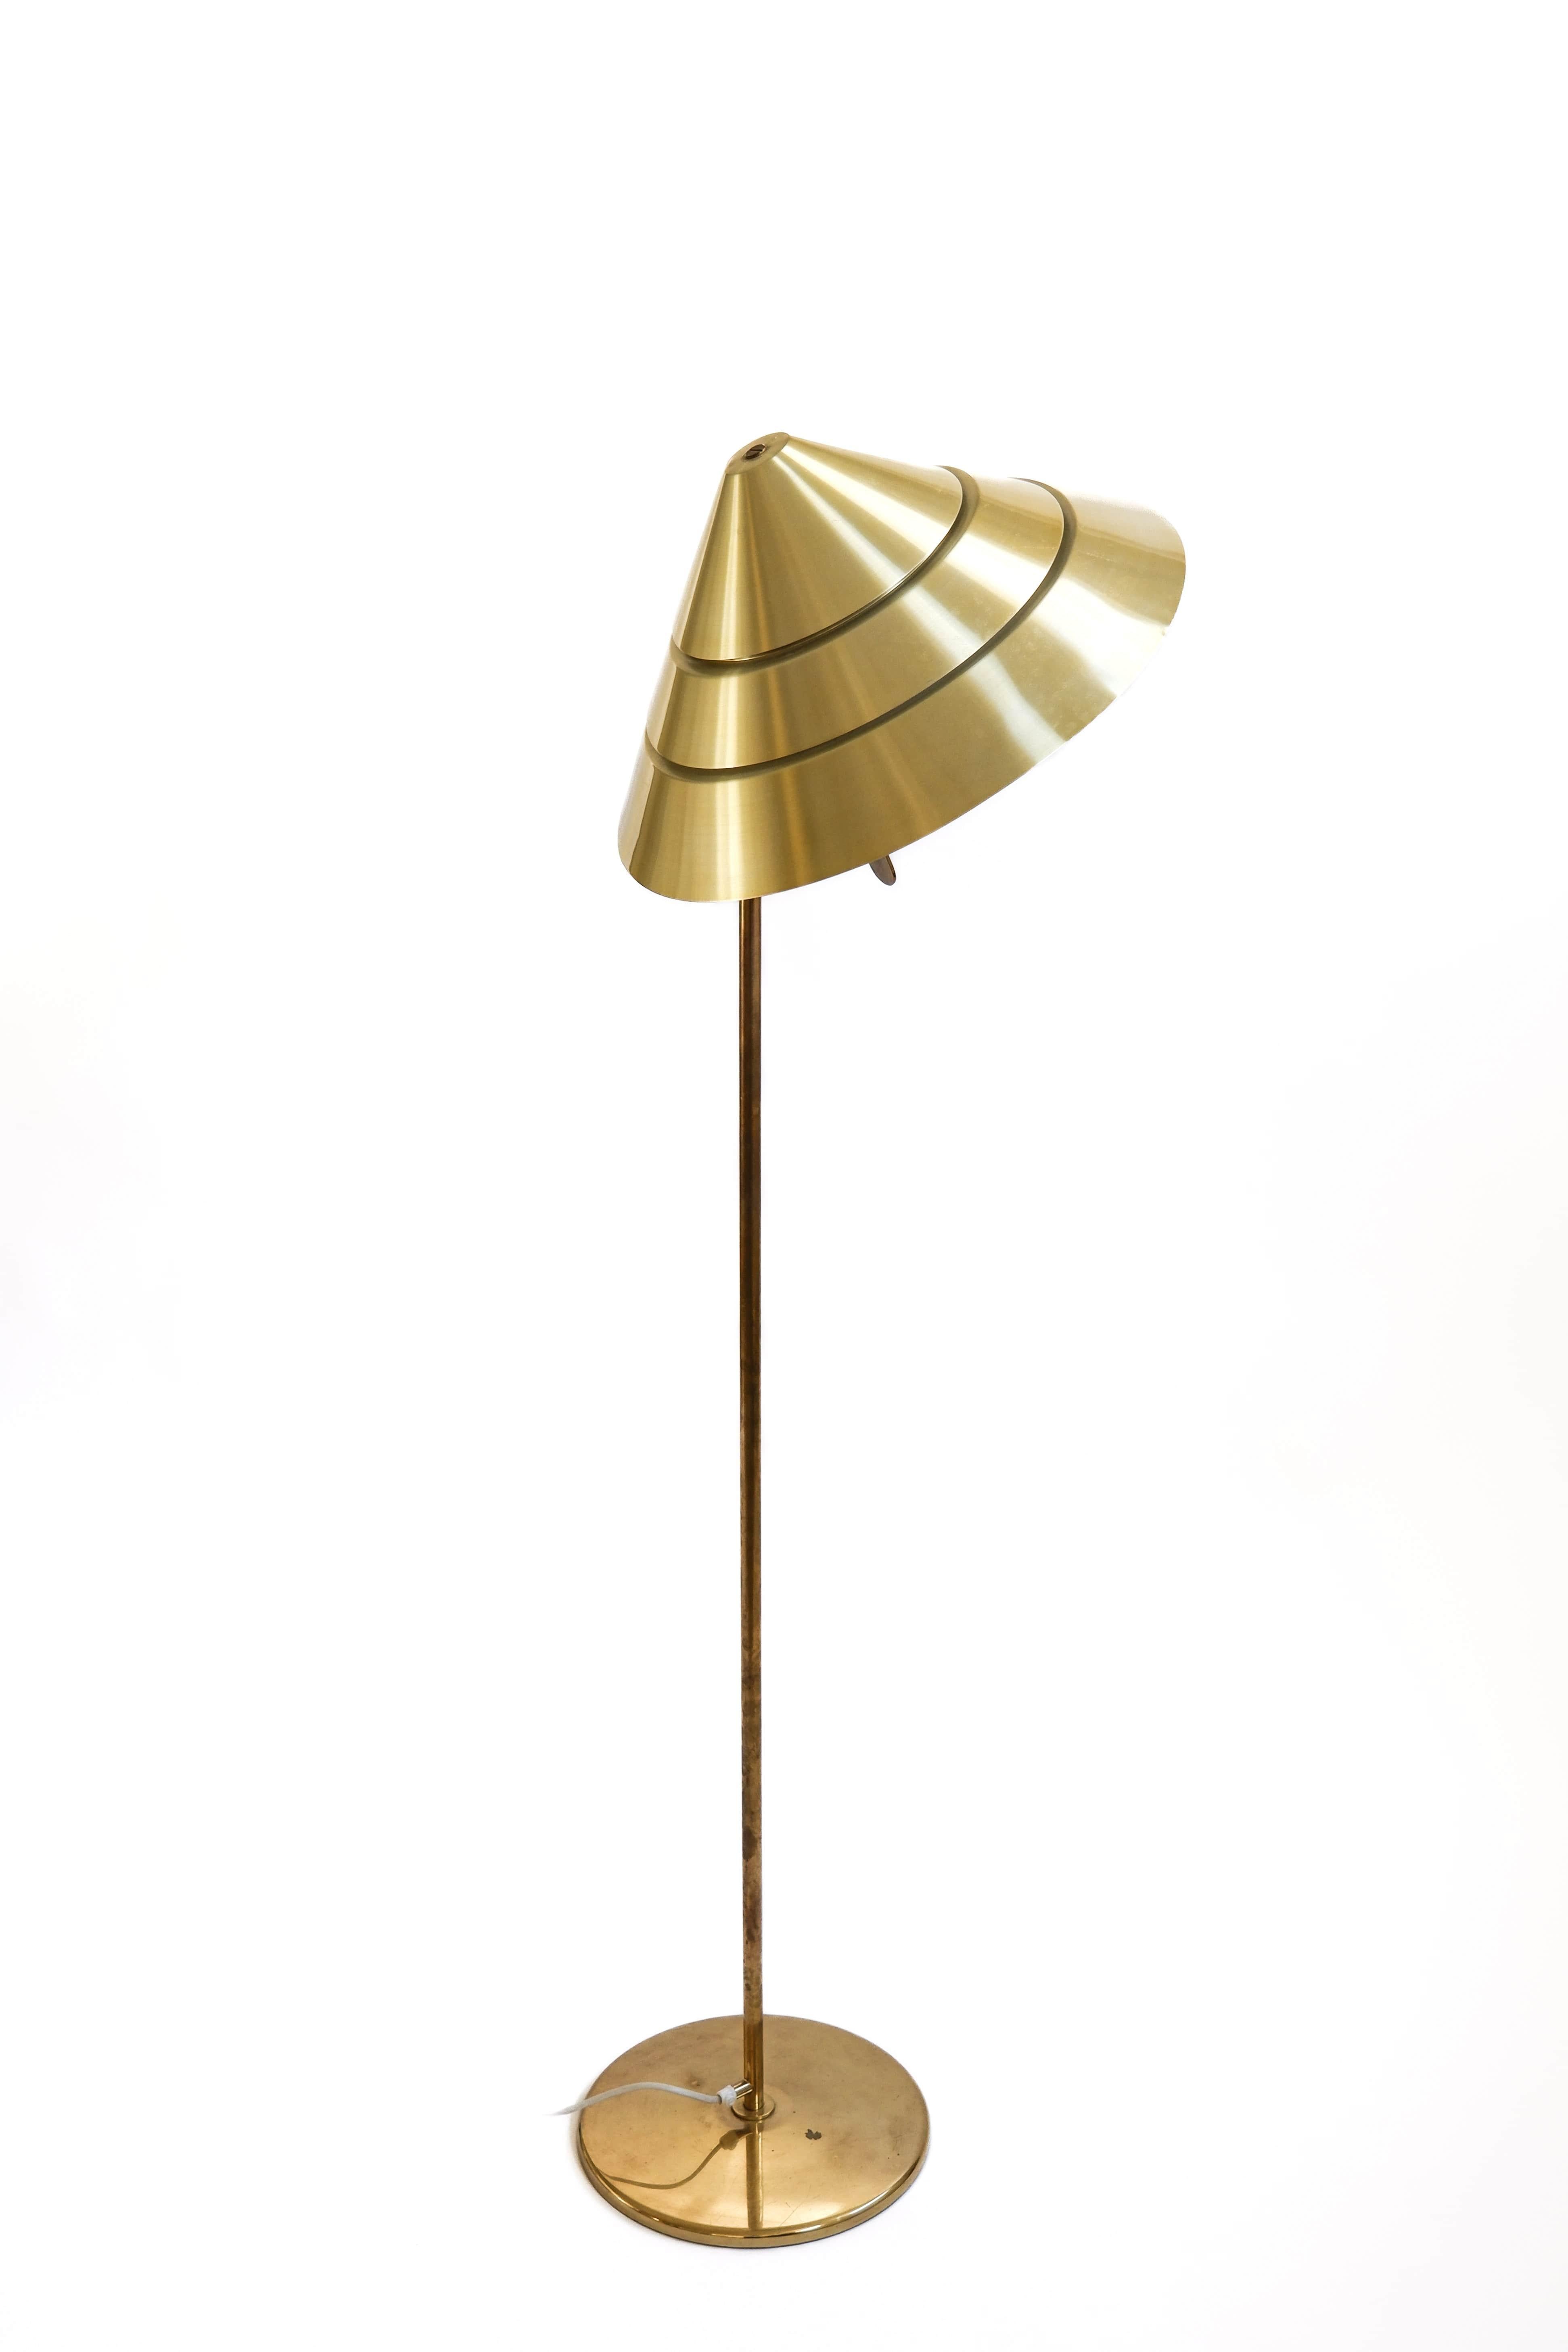 Extrememly rare floor lamp design by Hans Agne Jakobsson and produced in Markaryd in the 70's. This floor lamp is the Tropicana model, G222, only produced at a low amount. The lamp is made in full brass. It has a shade that goes up and down to be